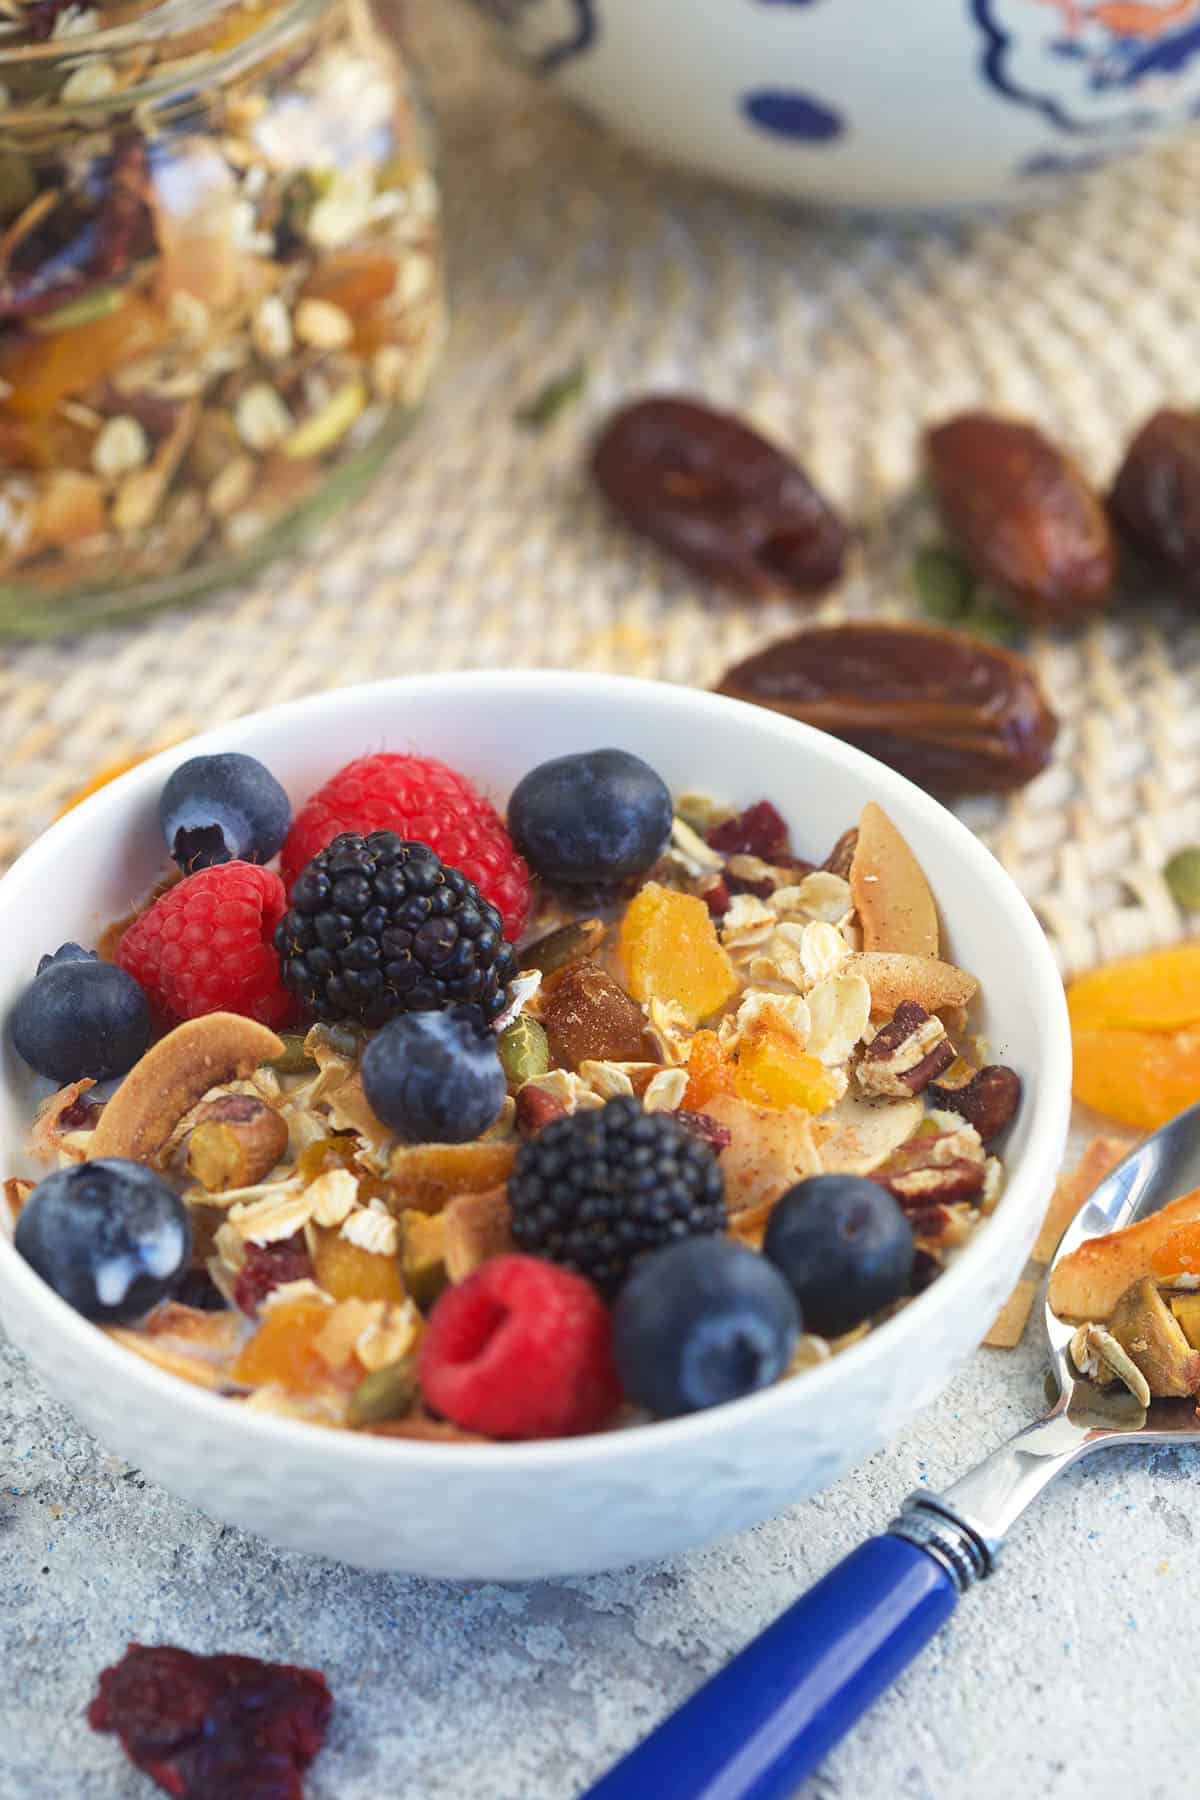 A white bowl is filled with muesli and berries.